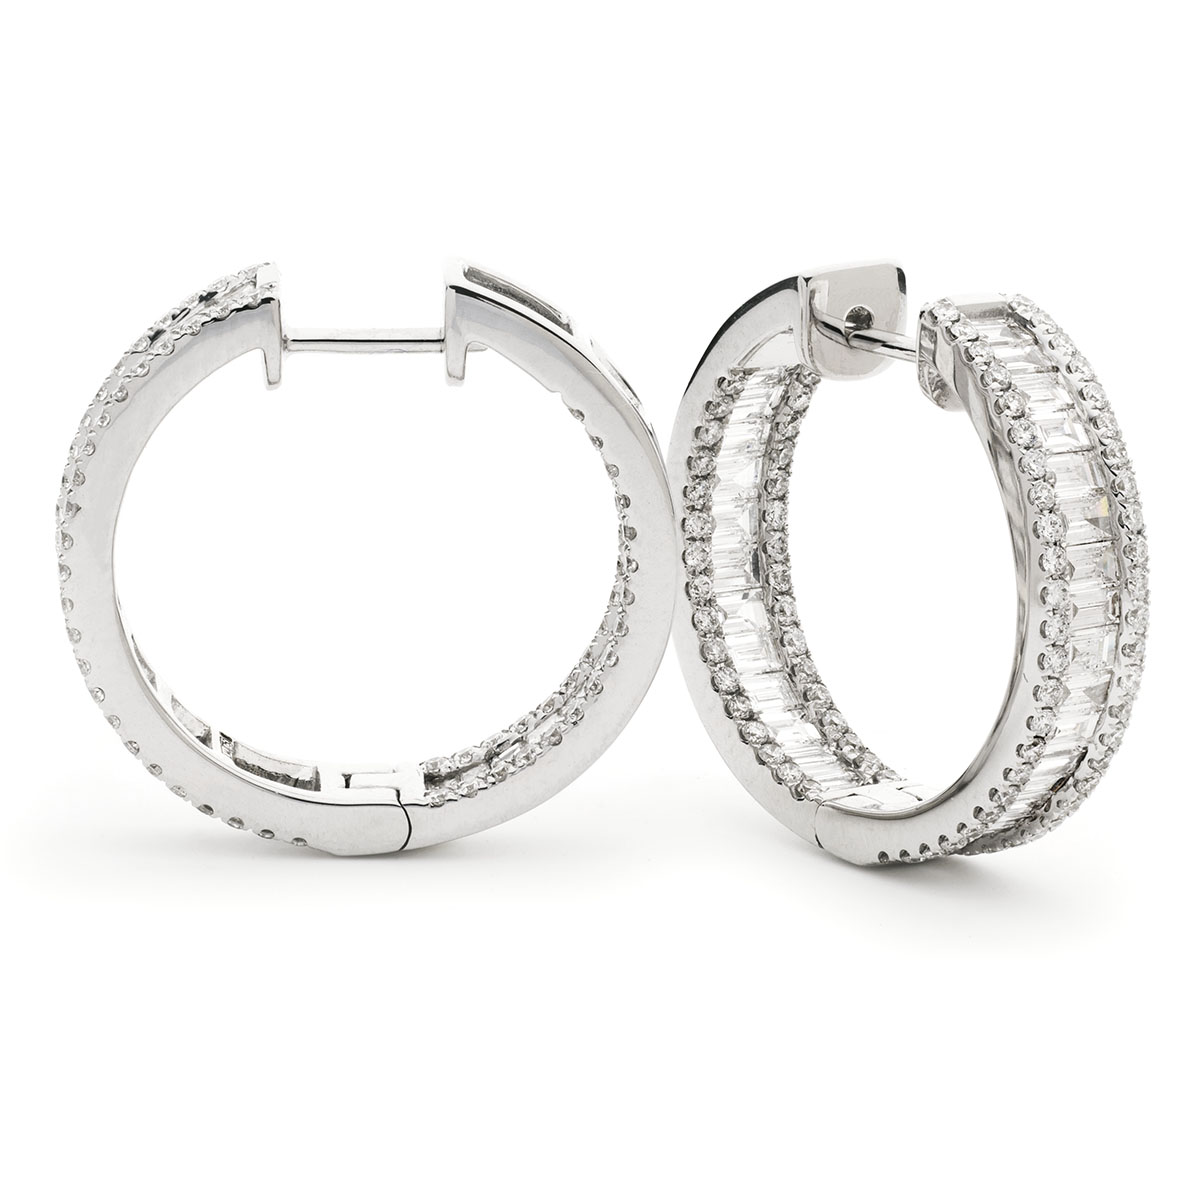 Baguette Cut In And Out Round Diamond Hoops Earrings